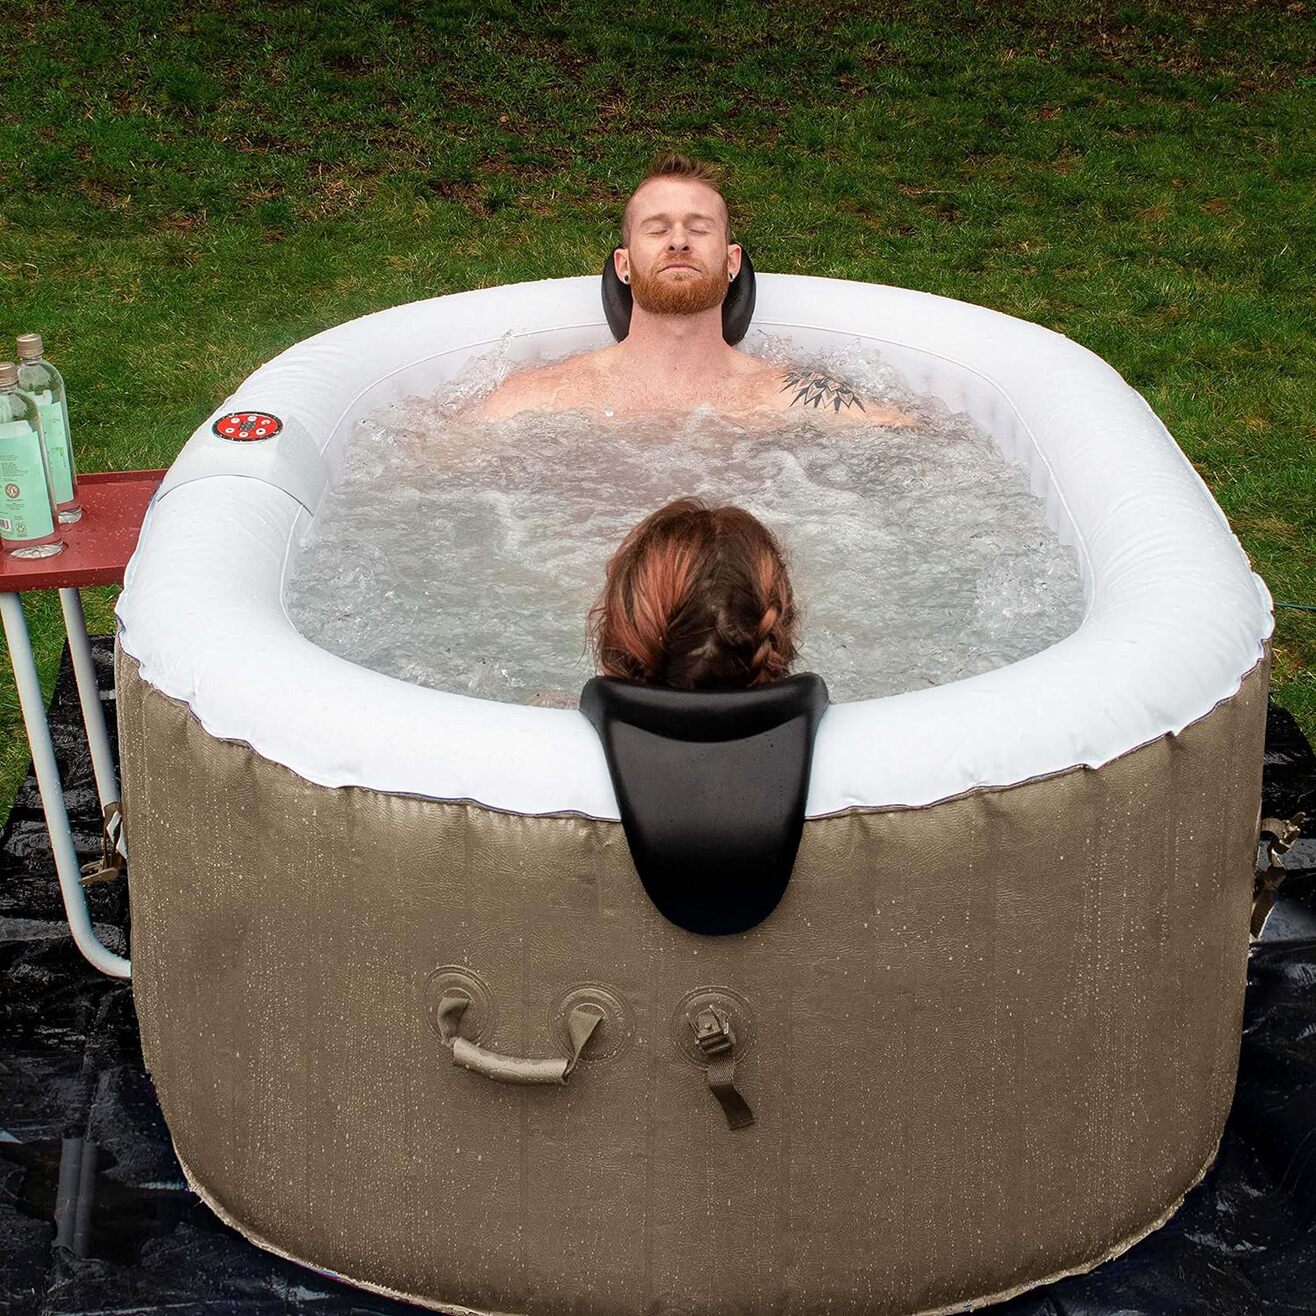 The-10-Best-2-Person-Hot-Tubs-&-Buying-Guide-TN